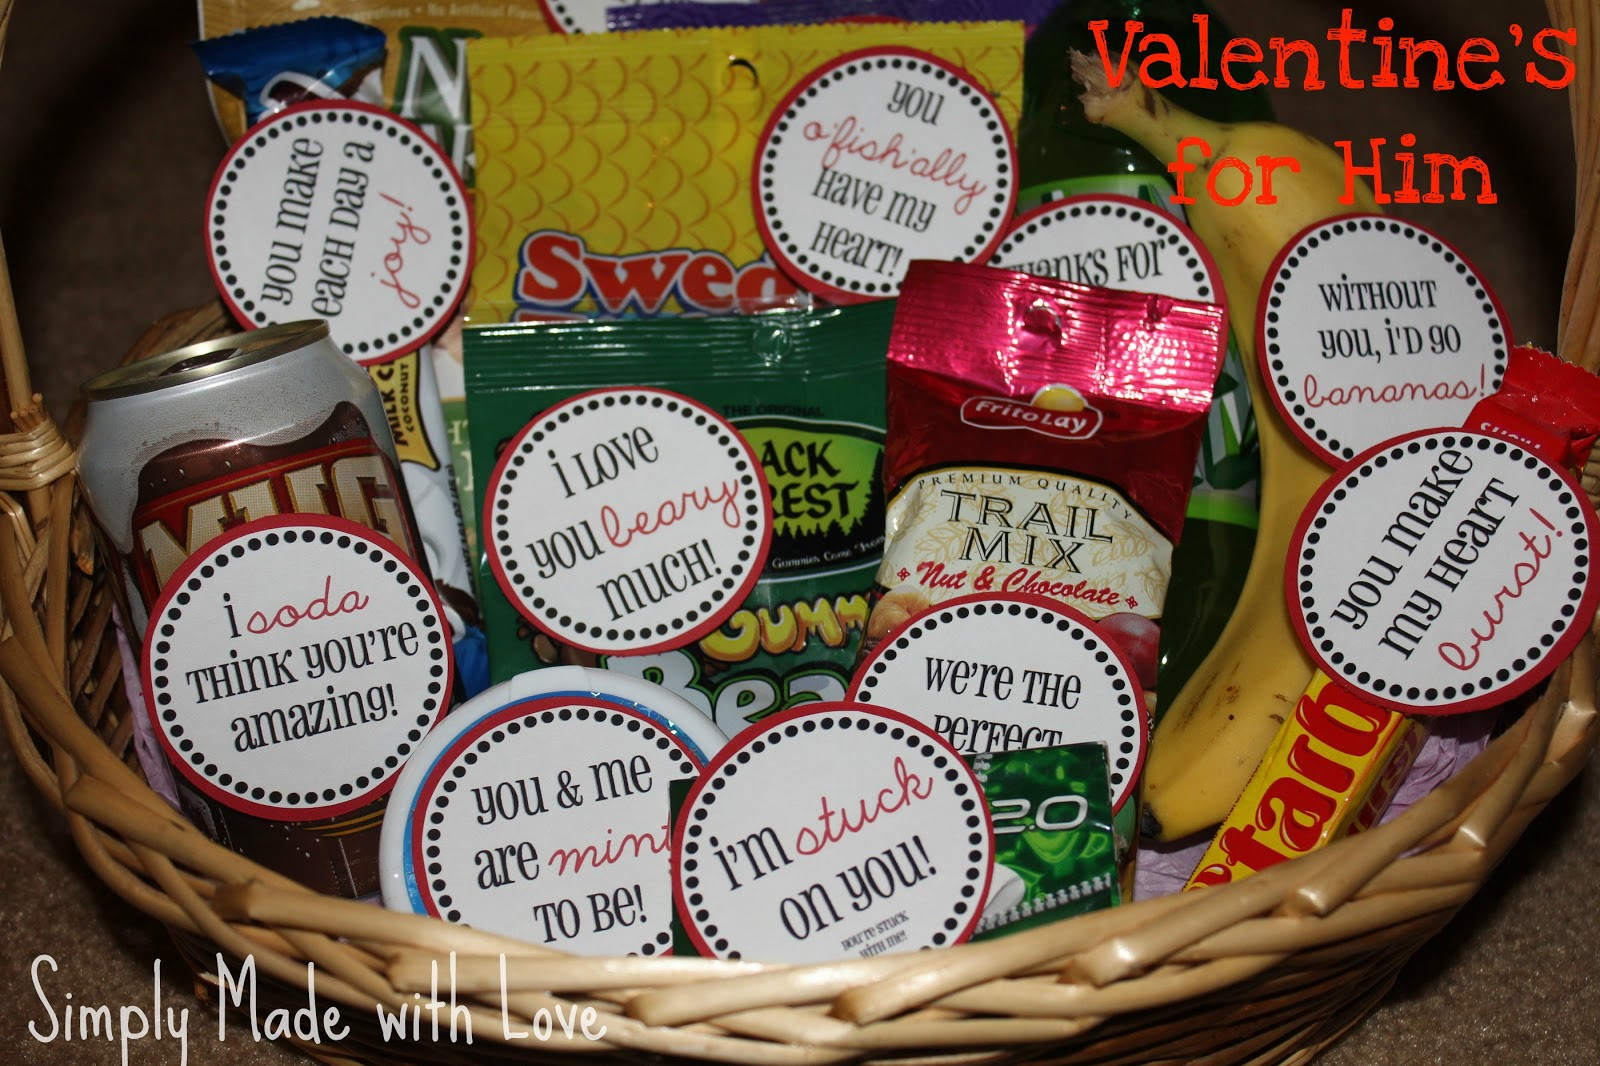 Valentines Gift Basket Ideas For Him
 simply made with love Valentine s for Him & Free Printable